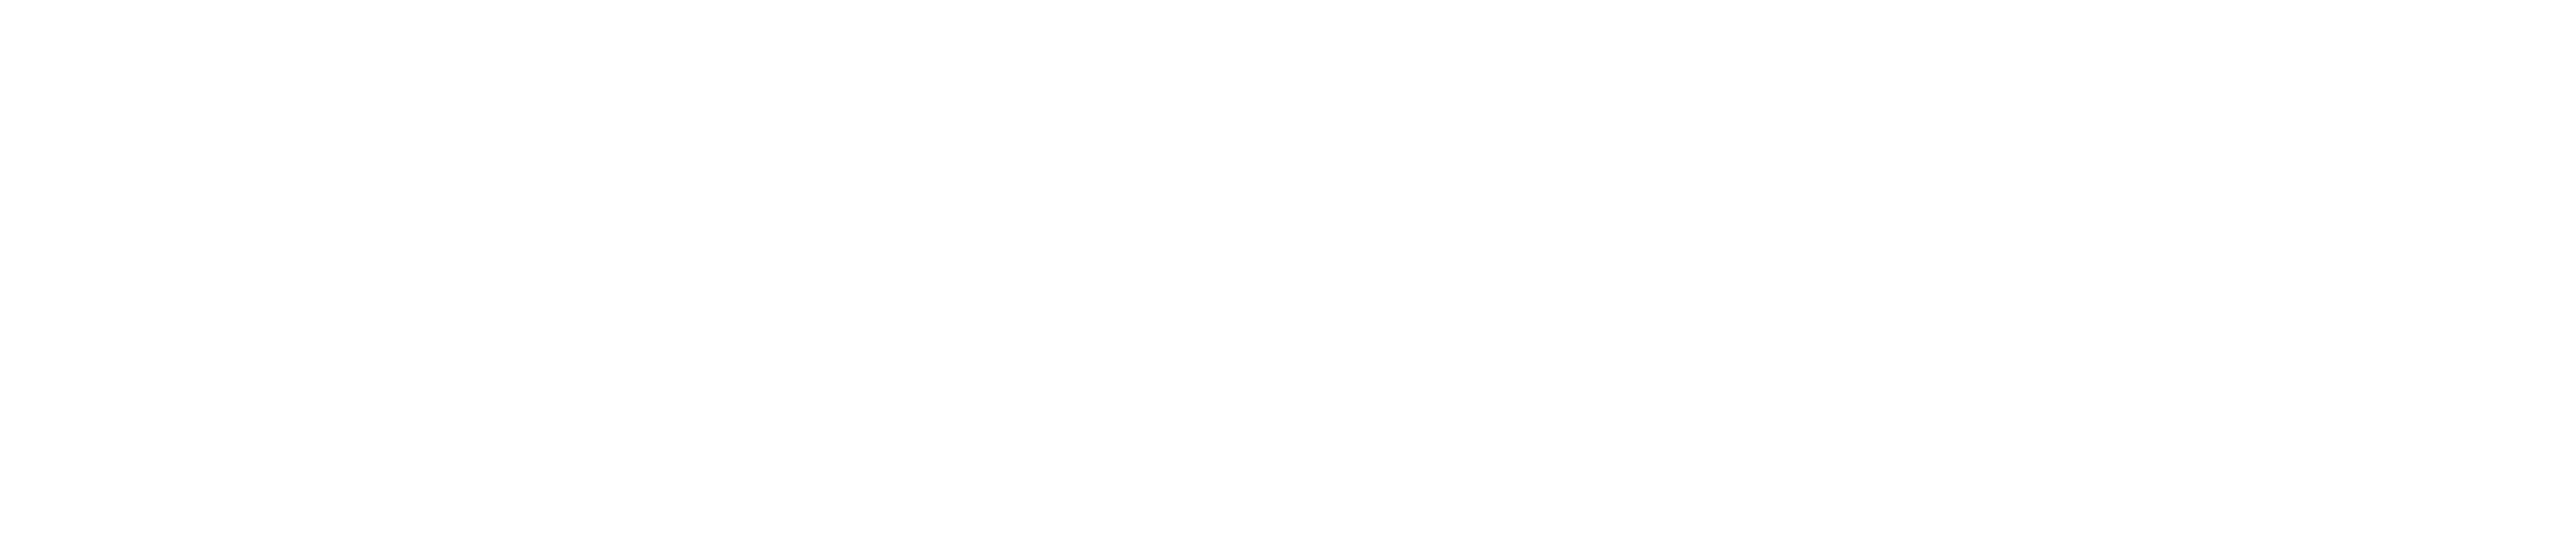 excellence in mr patient monitoring 25 years